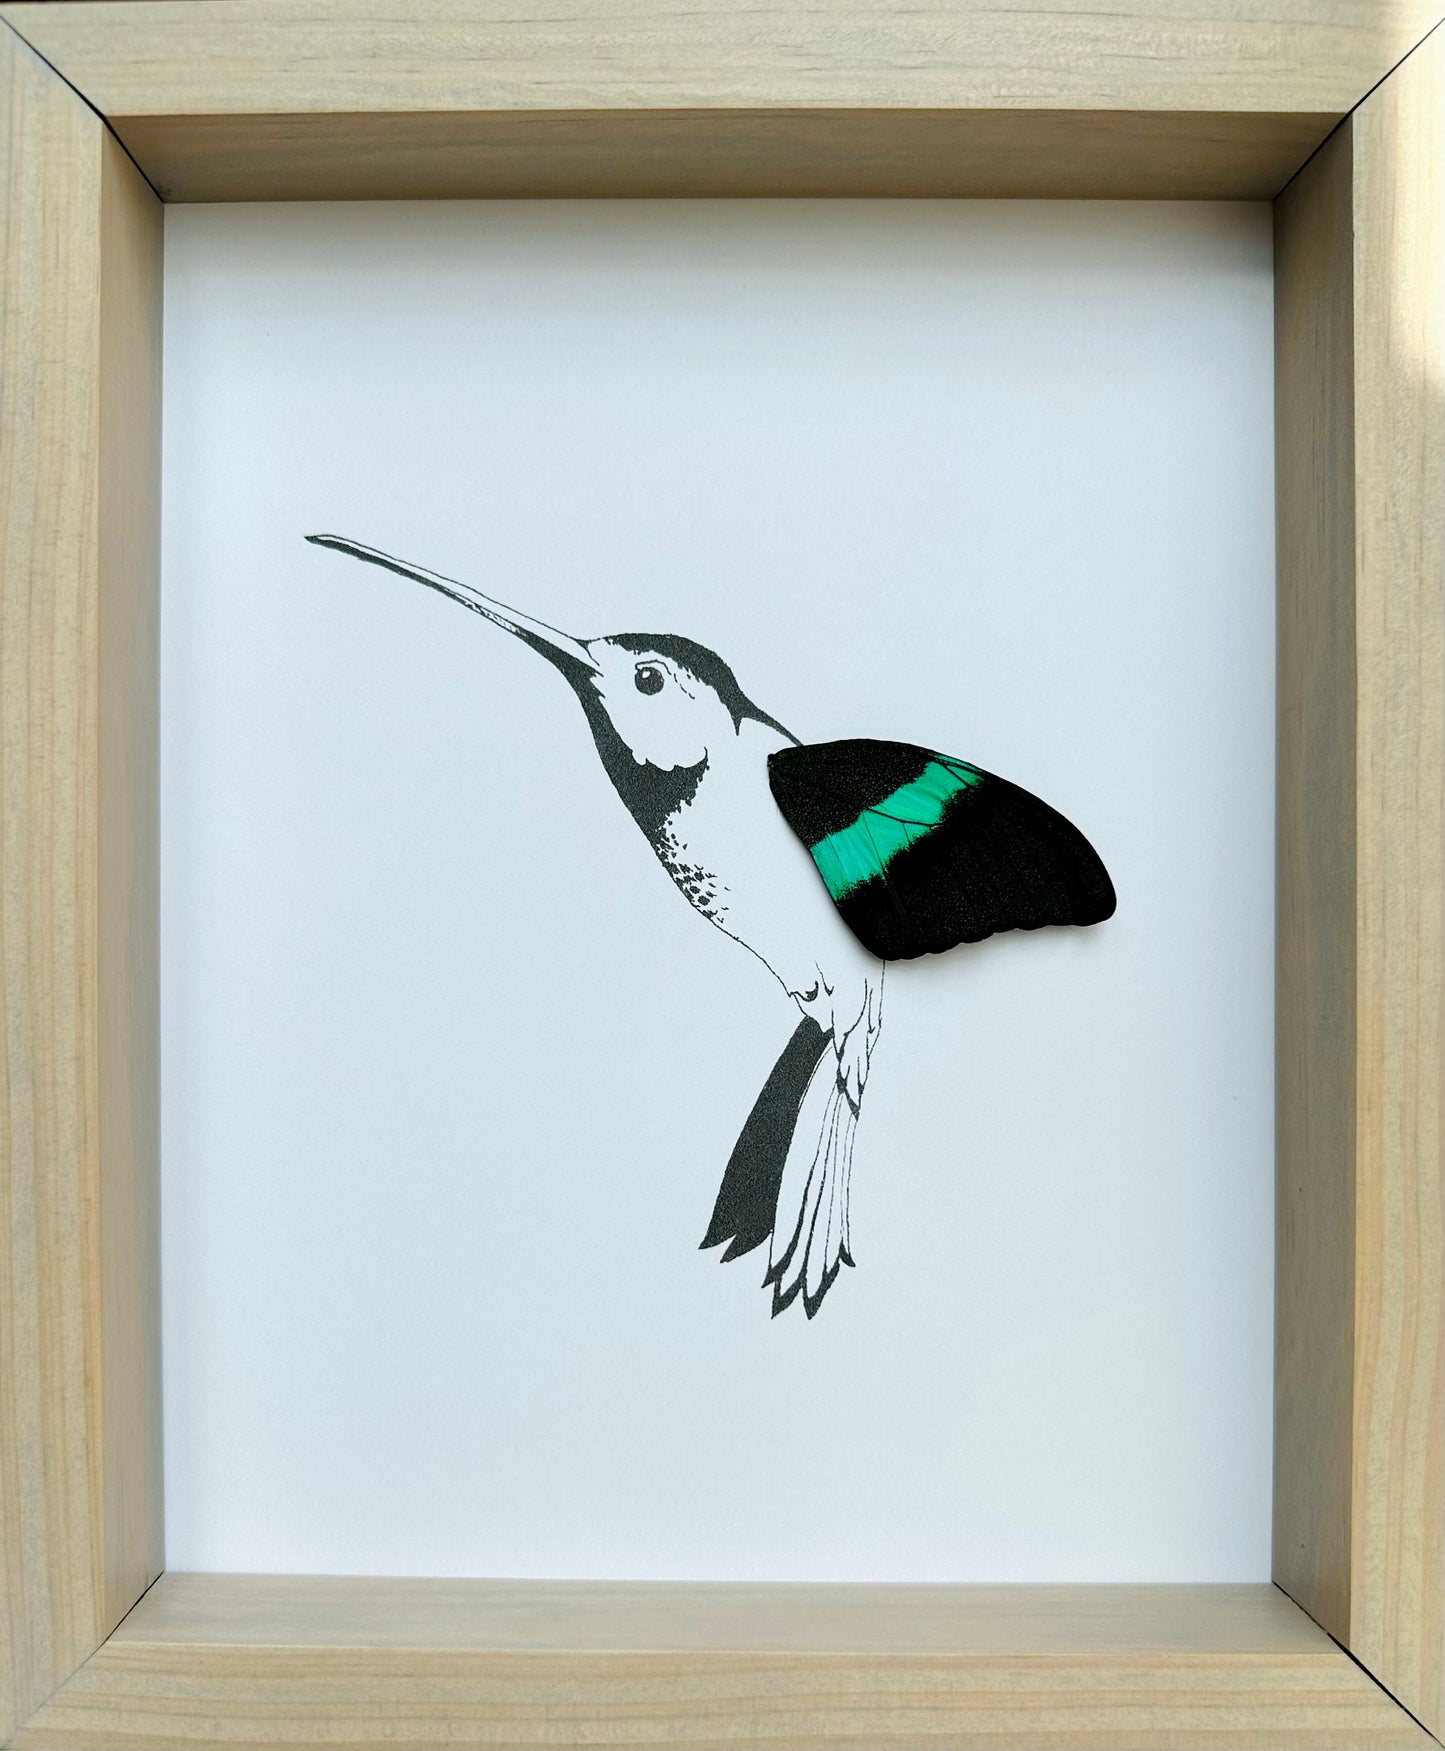 Hummingbird Real Butterfly Wing Framed Art Ethically Sourced made in MN USA - Holly Ulm - Isms Butterfly Conservation Art